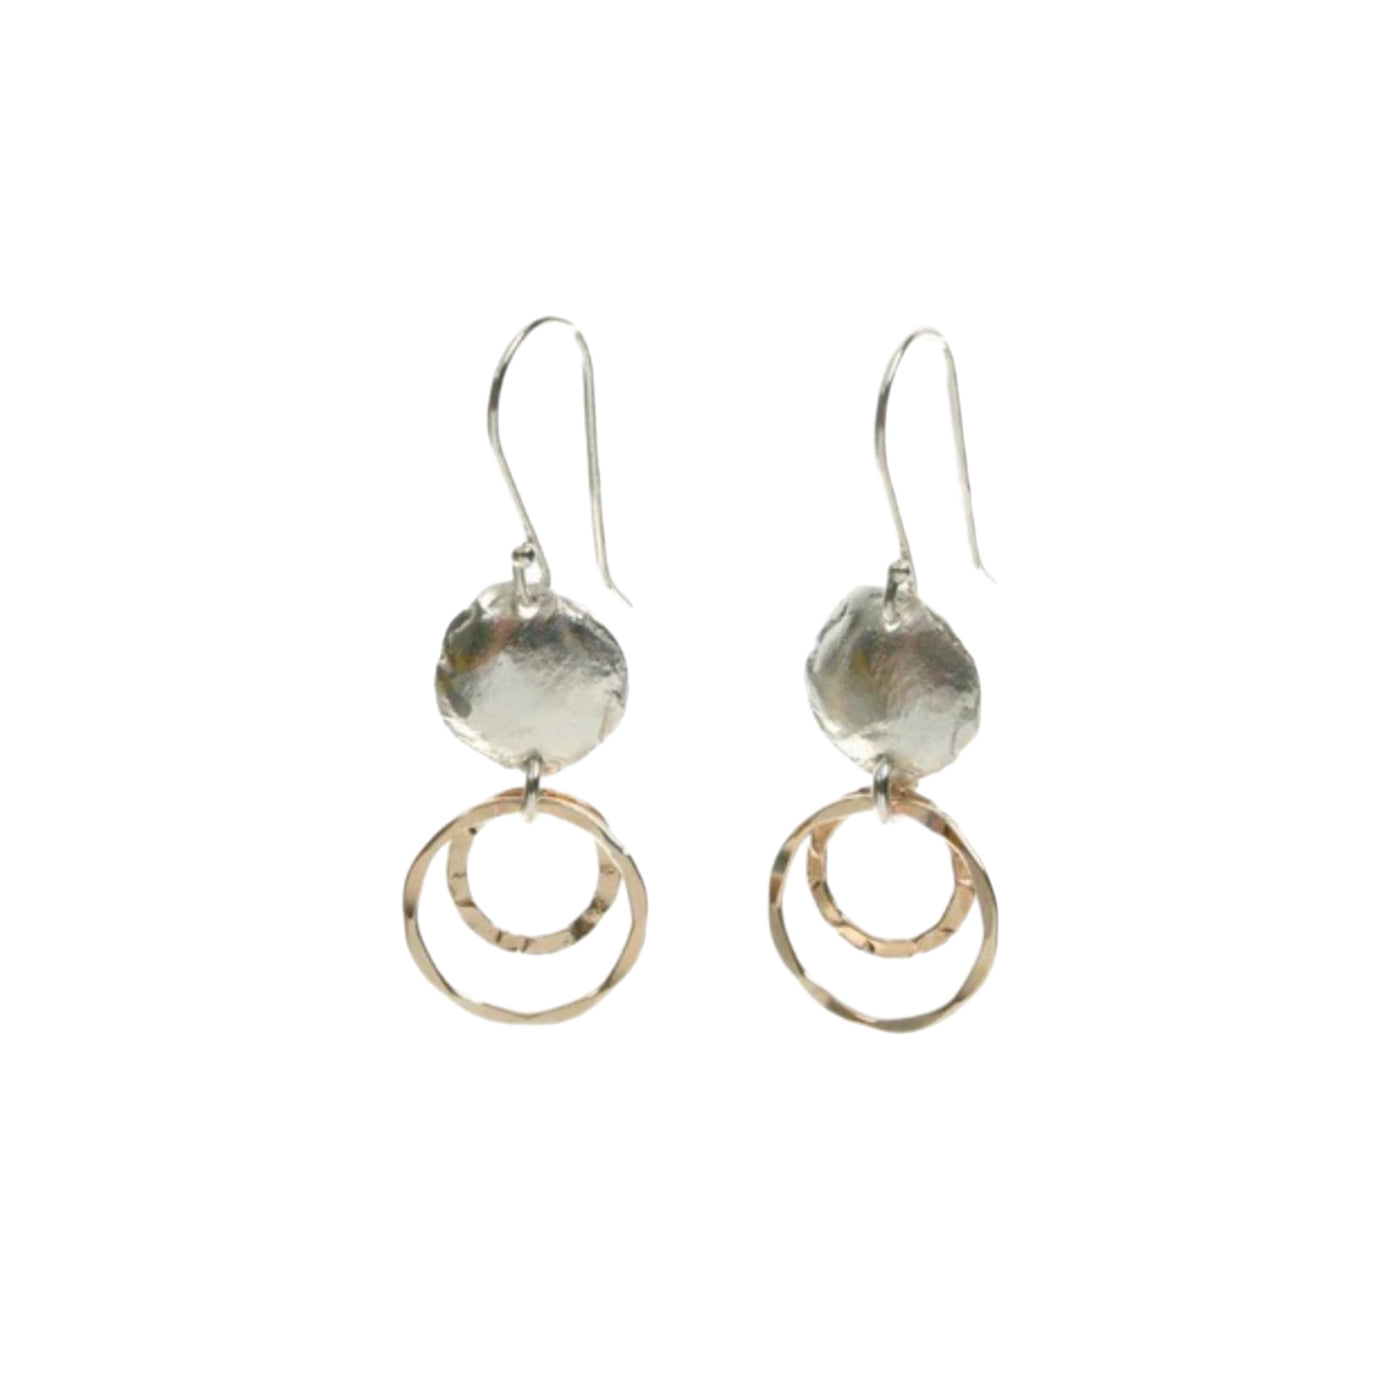 sterling silver and gold filled israeli drop earrings